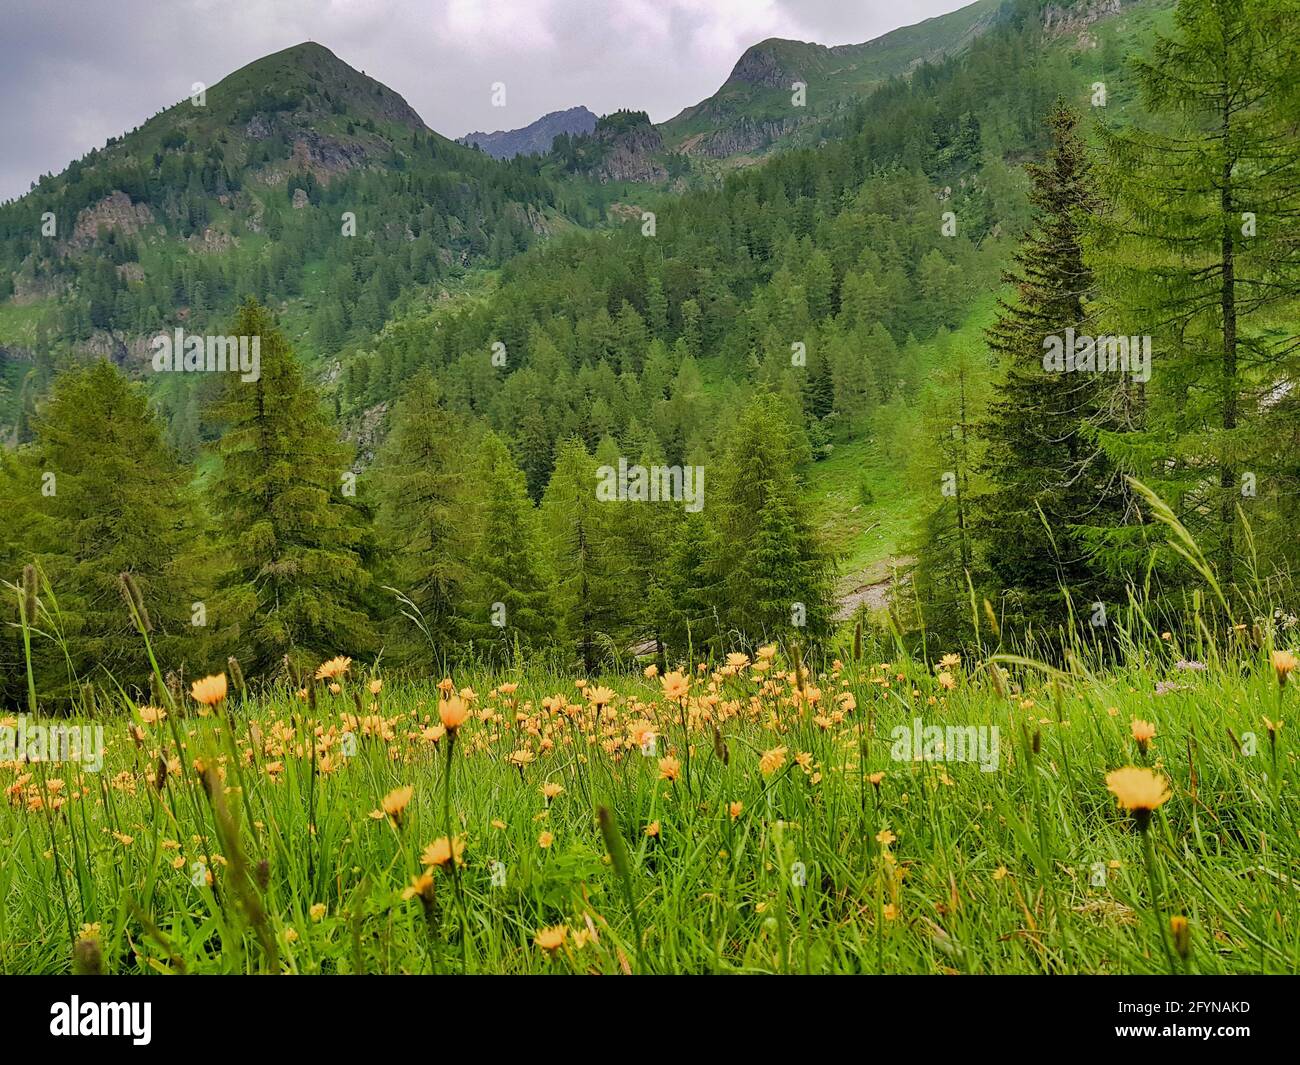 Flower field with green grass and dense trees in hills Stock Photo